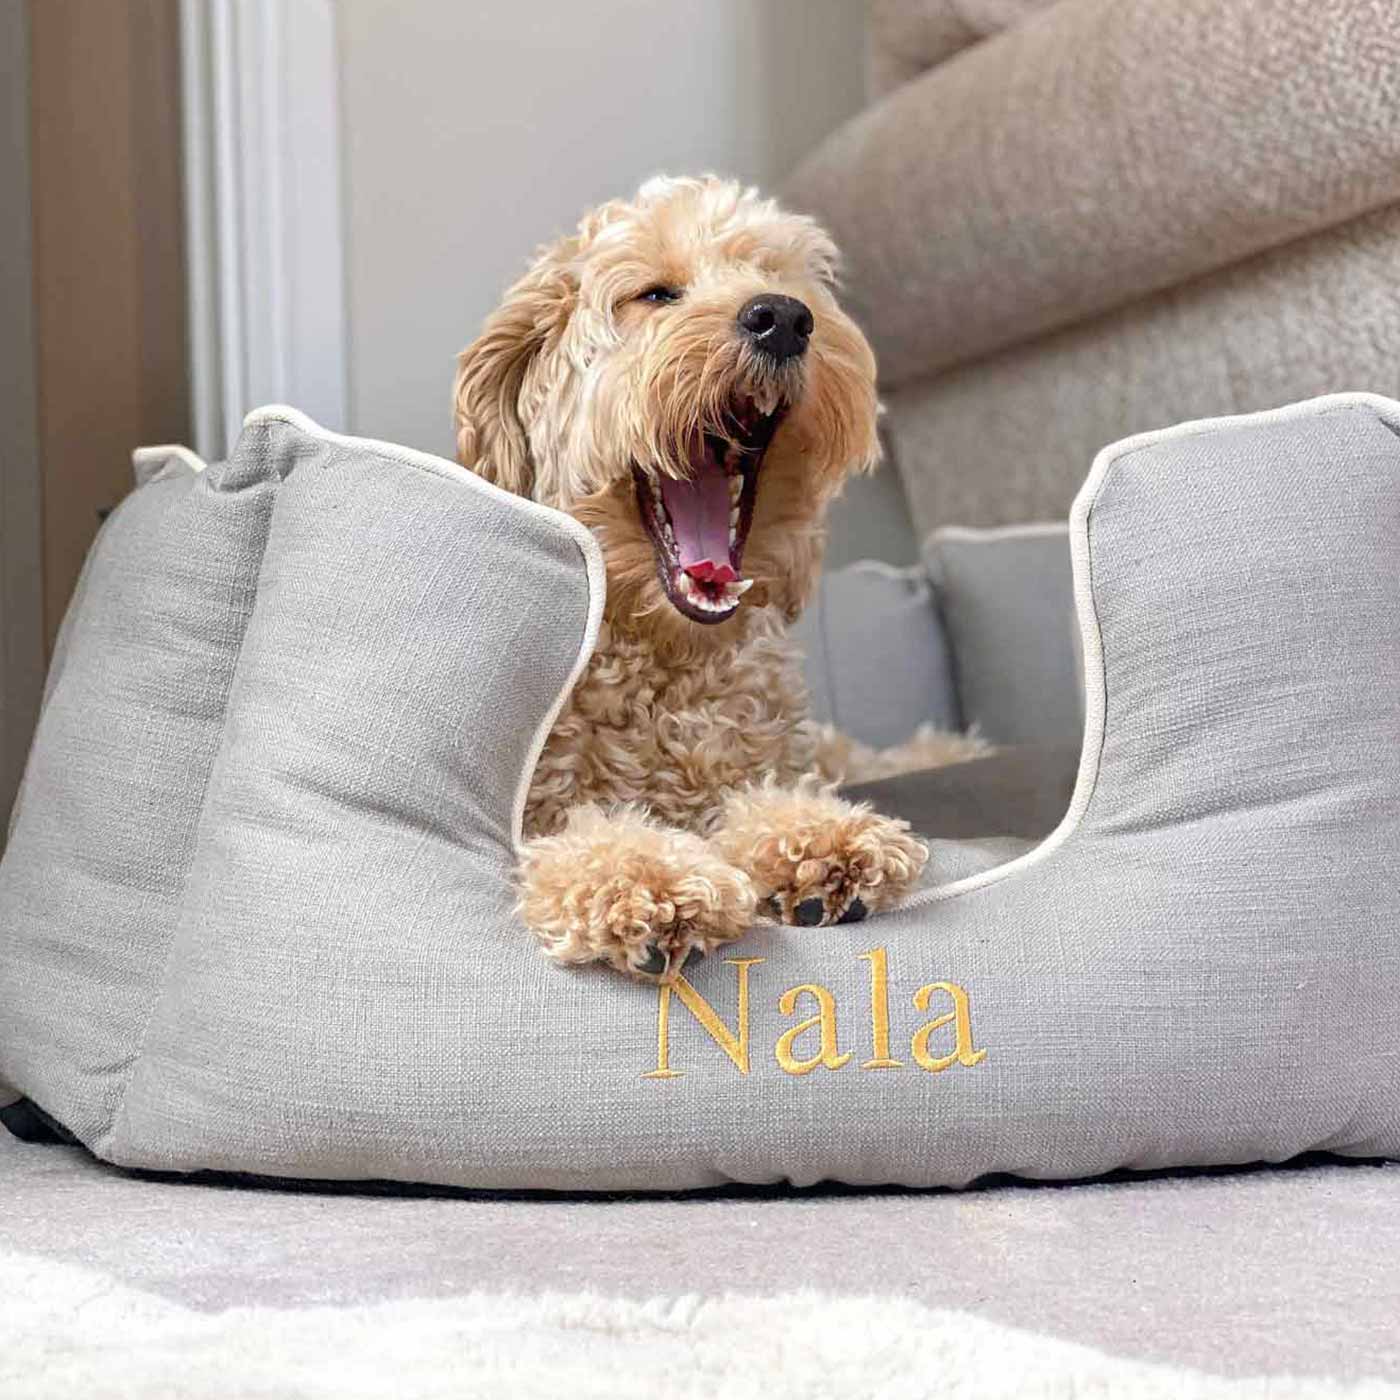 Discover Our Luxurious High Wall Bed For Dogs, Featuring inner pillow with plush teddy fleece on one side To Craft The Perfect Dog Bed In Stunning Stone! Available To Personalise Now at Lords & Labradors 